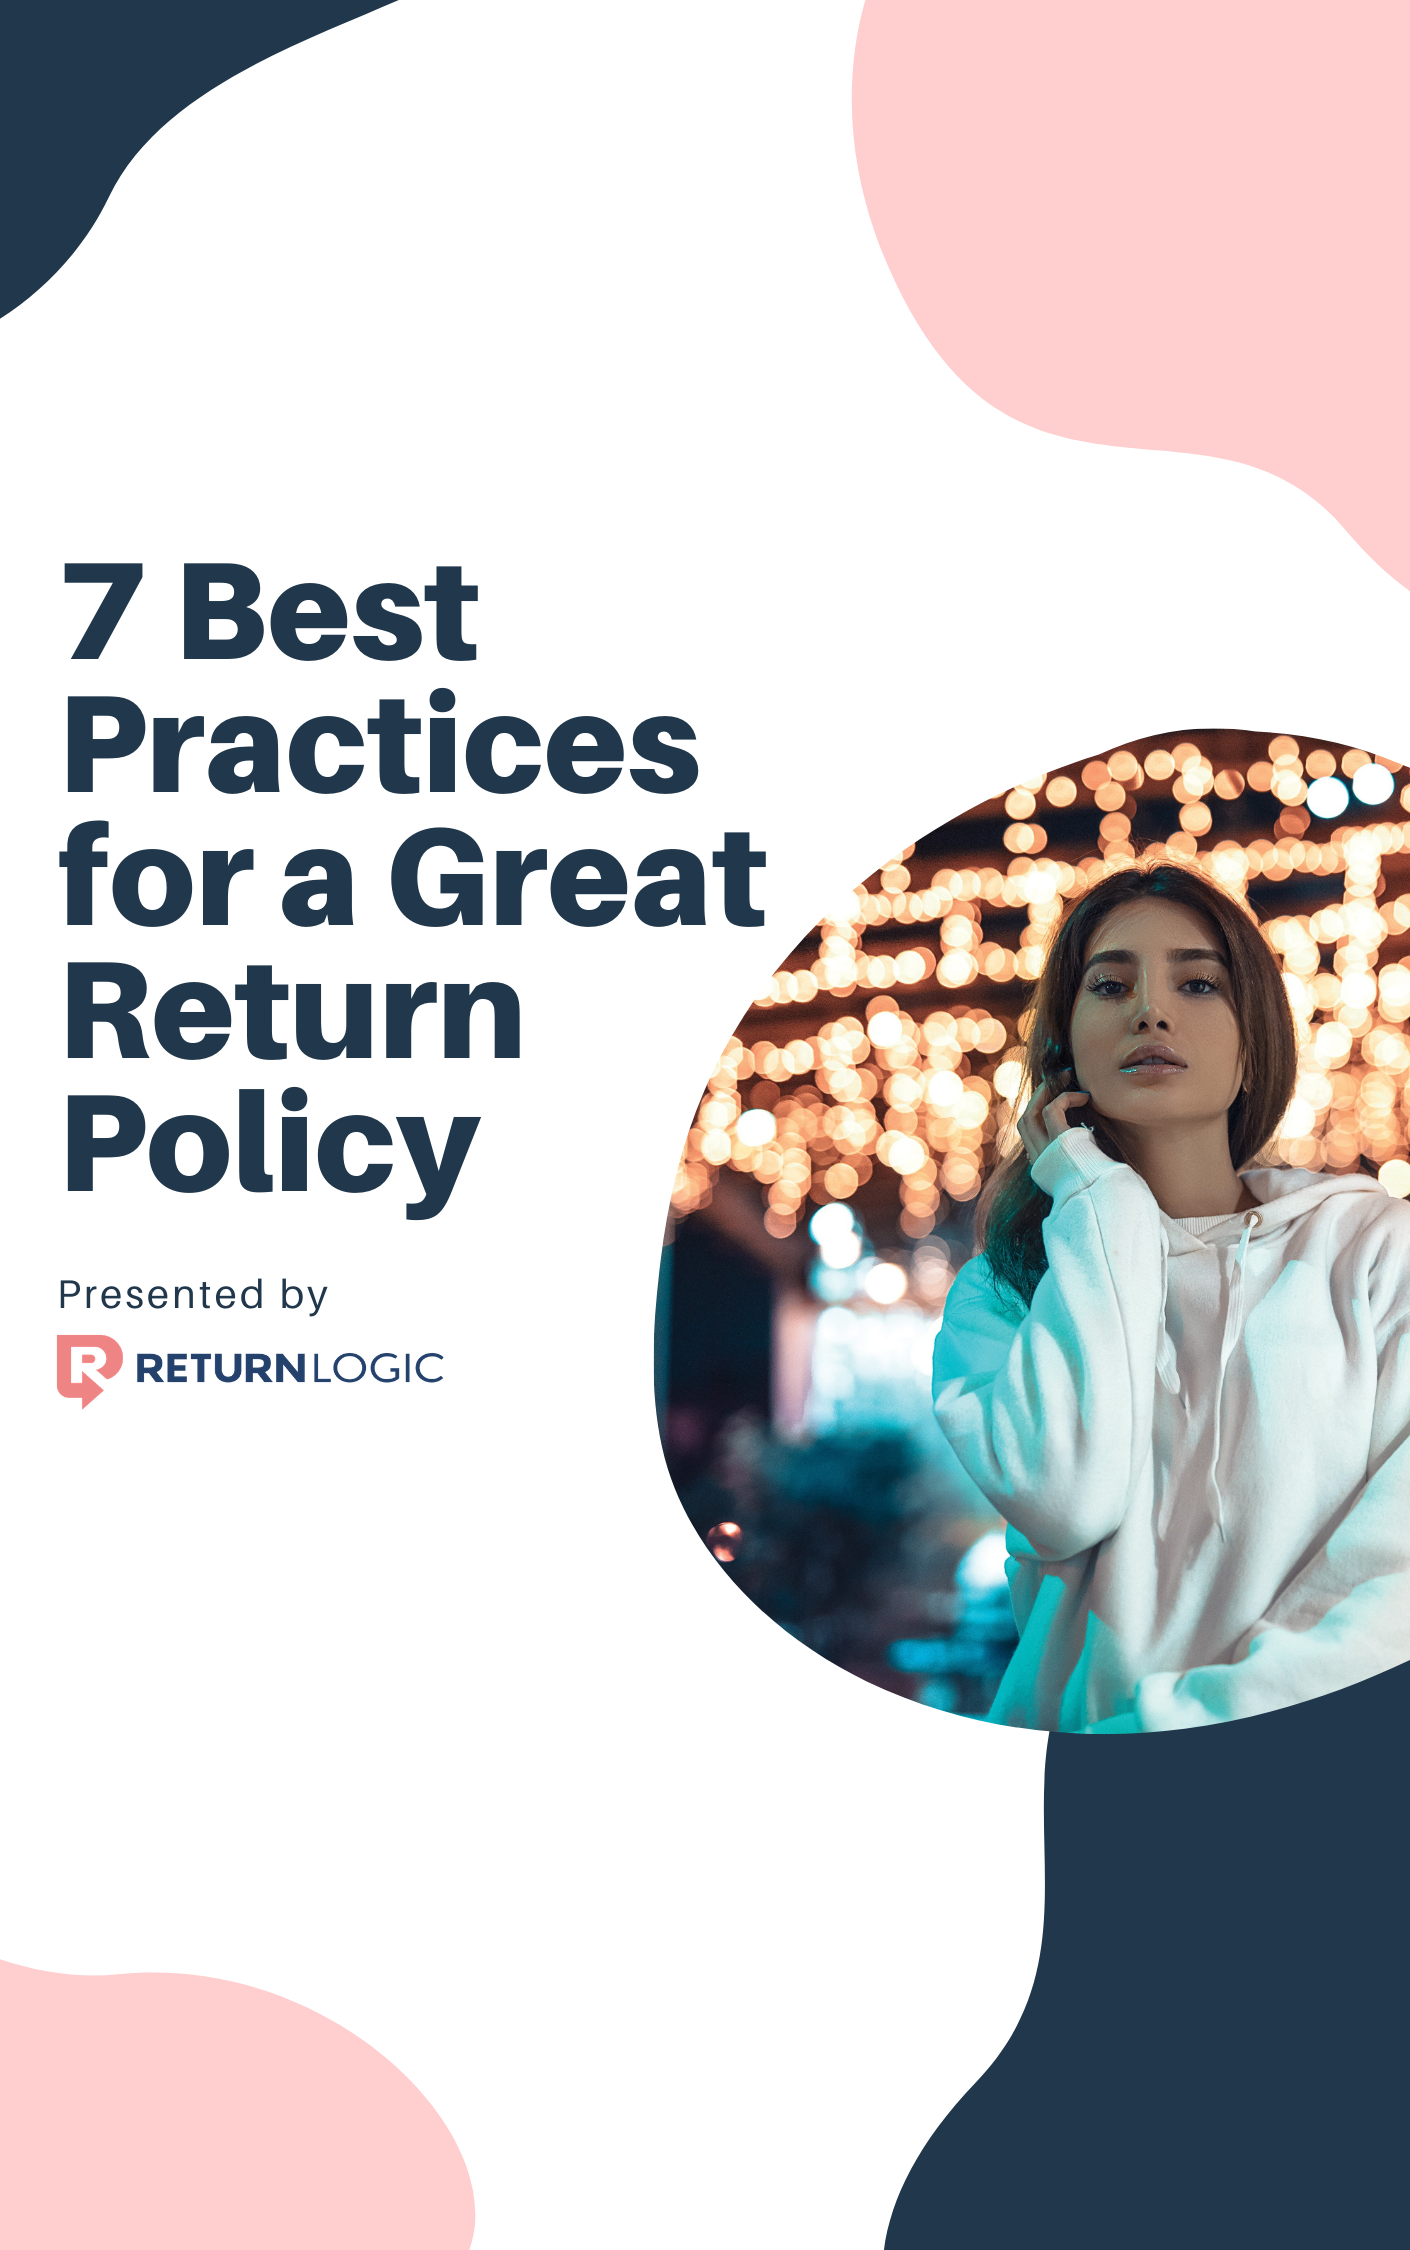 7-best-practices-for-a-great-return-policy-vertical-image